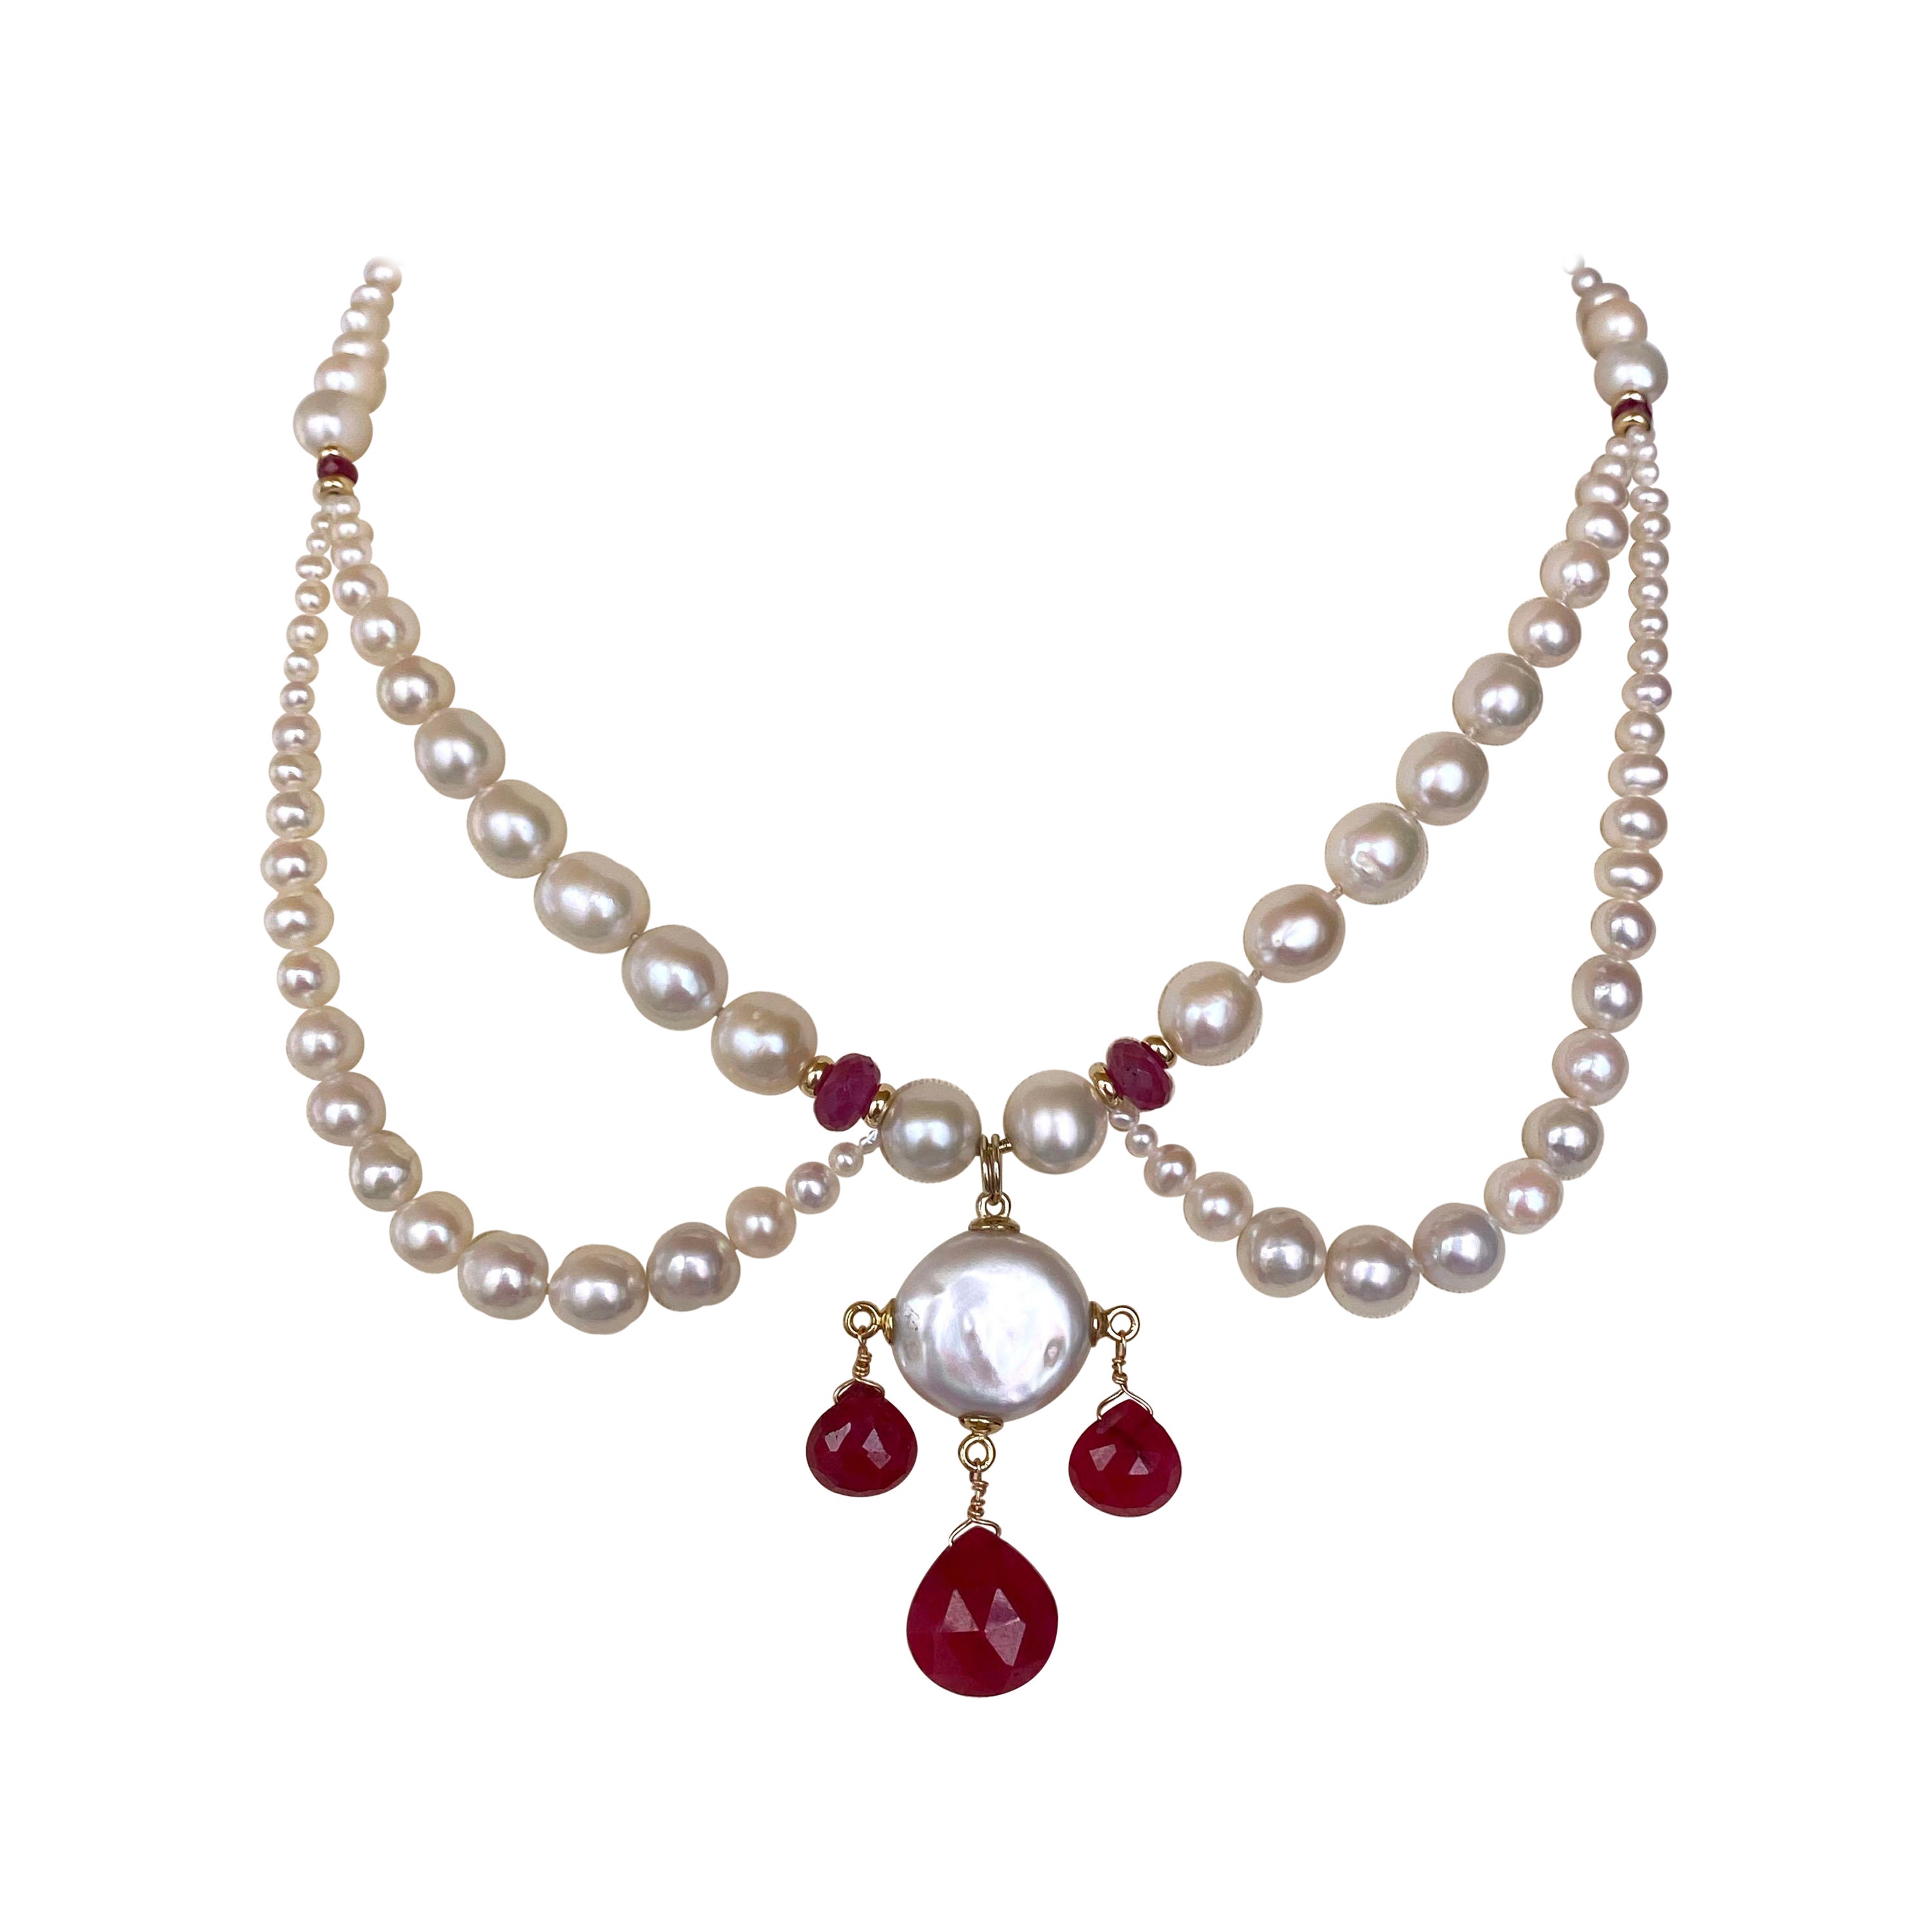 Marina J. Graduated Pearl, Ruby and 14K Yellow Gold, Chandelier Necklace